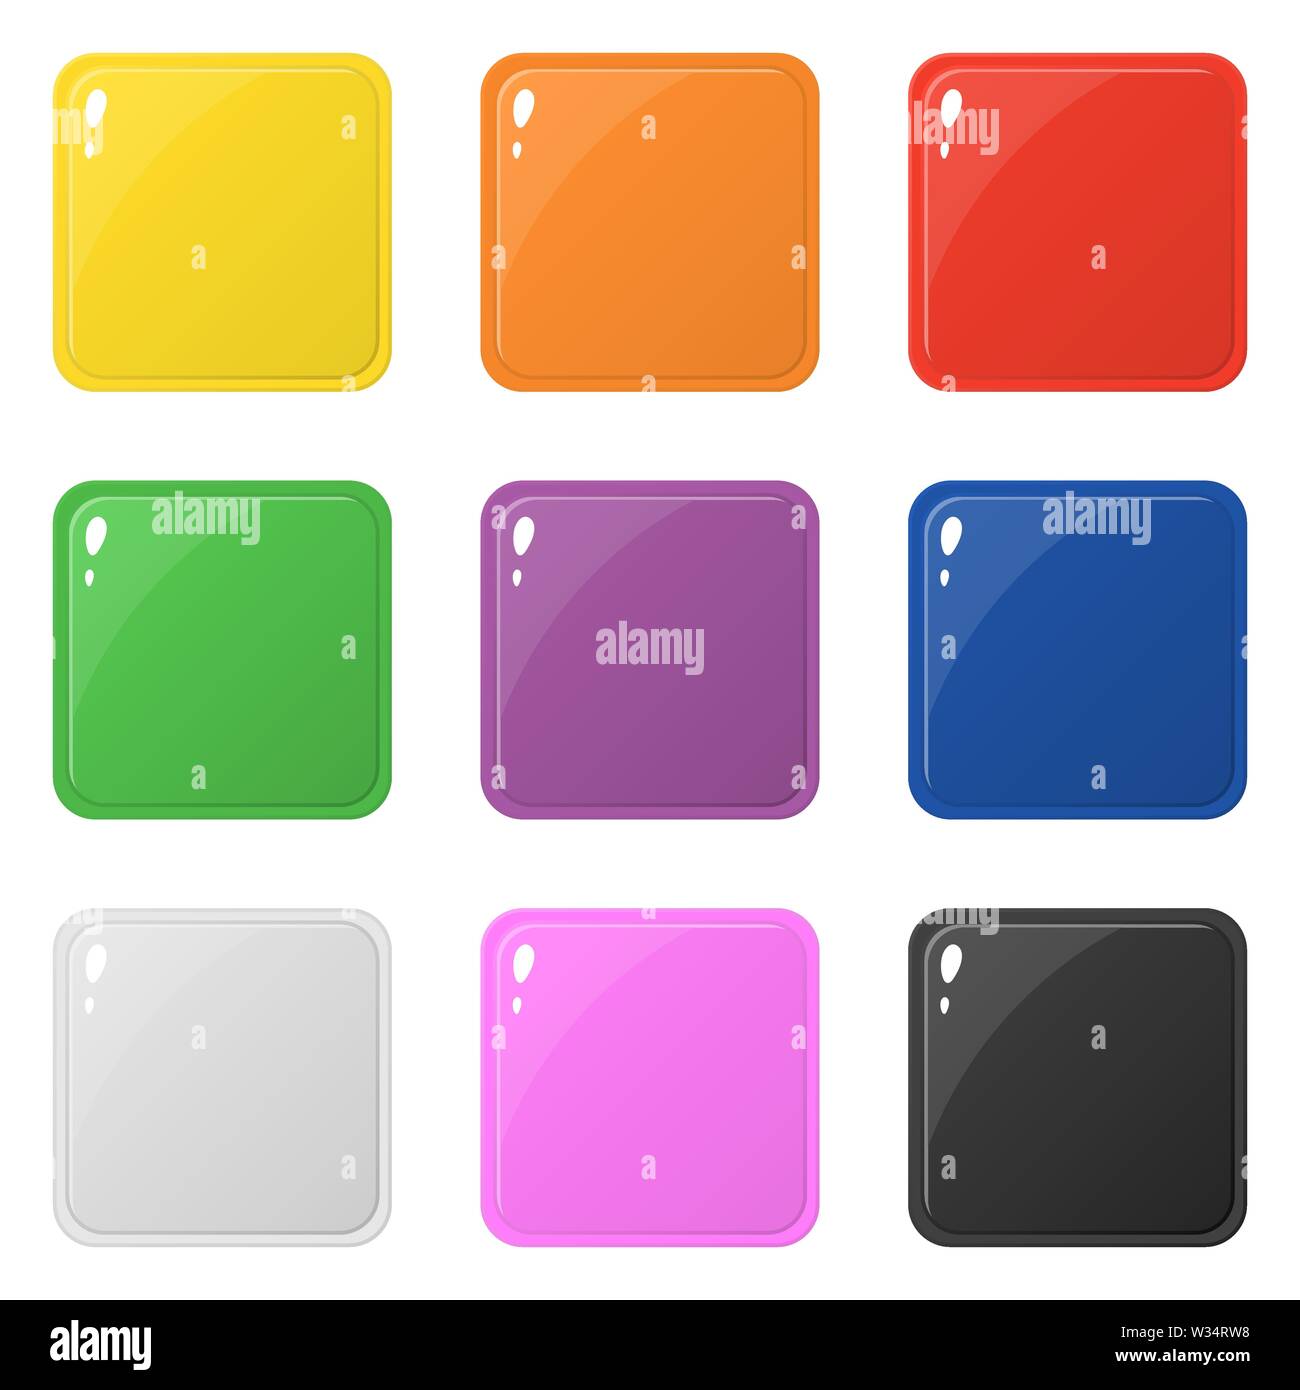 Set Of Colorful Buttons Vector Illustration Isolated On White